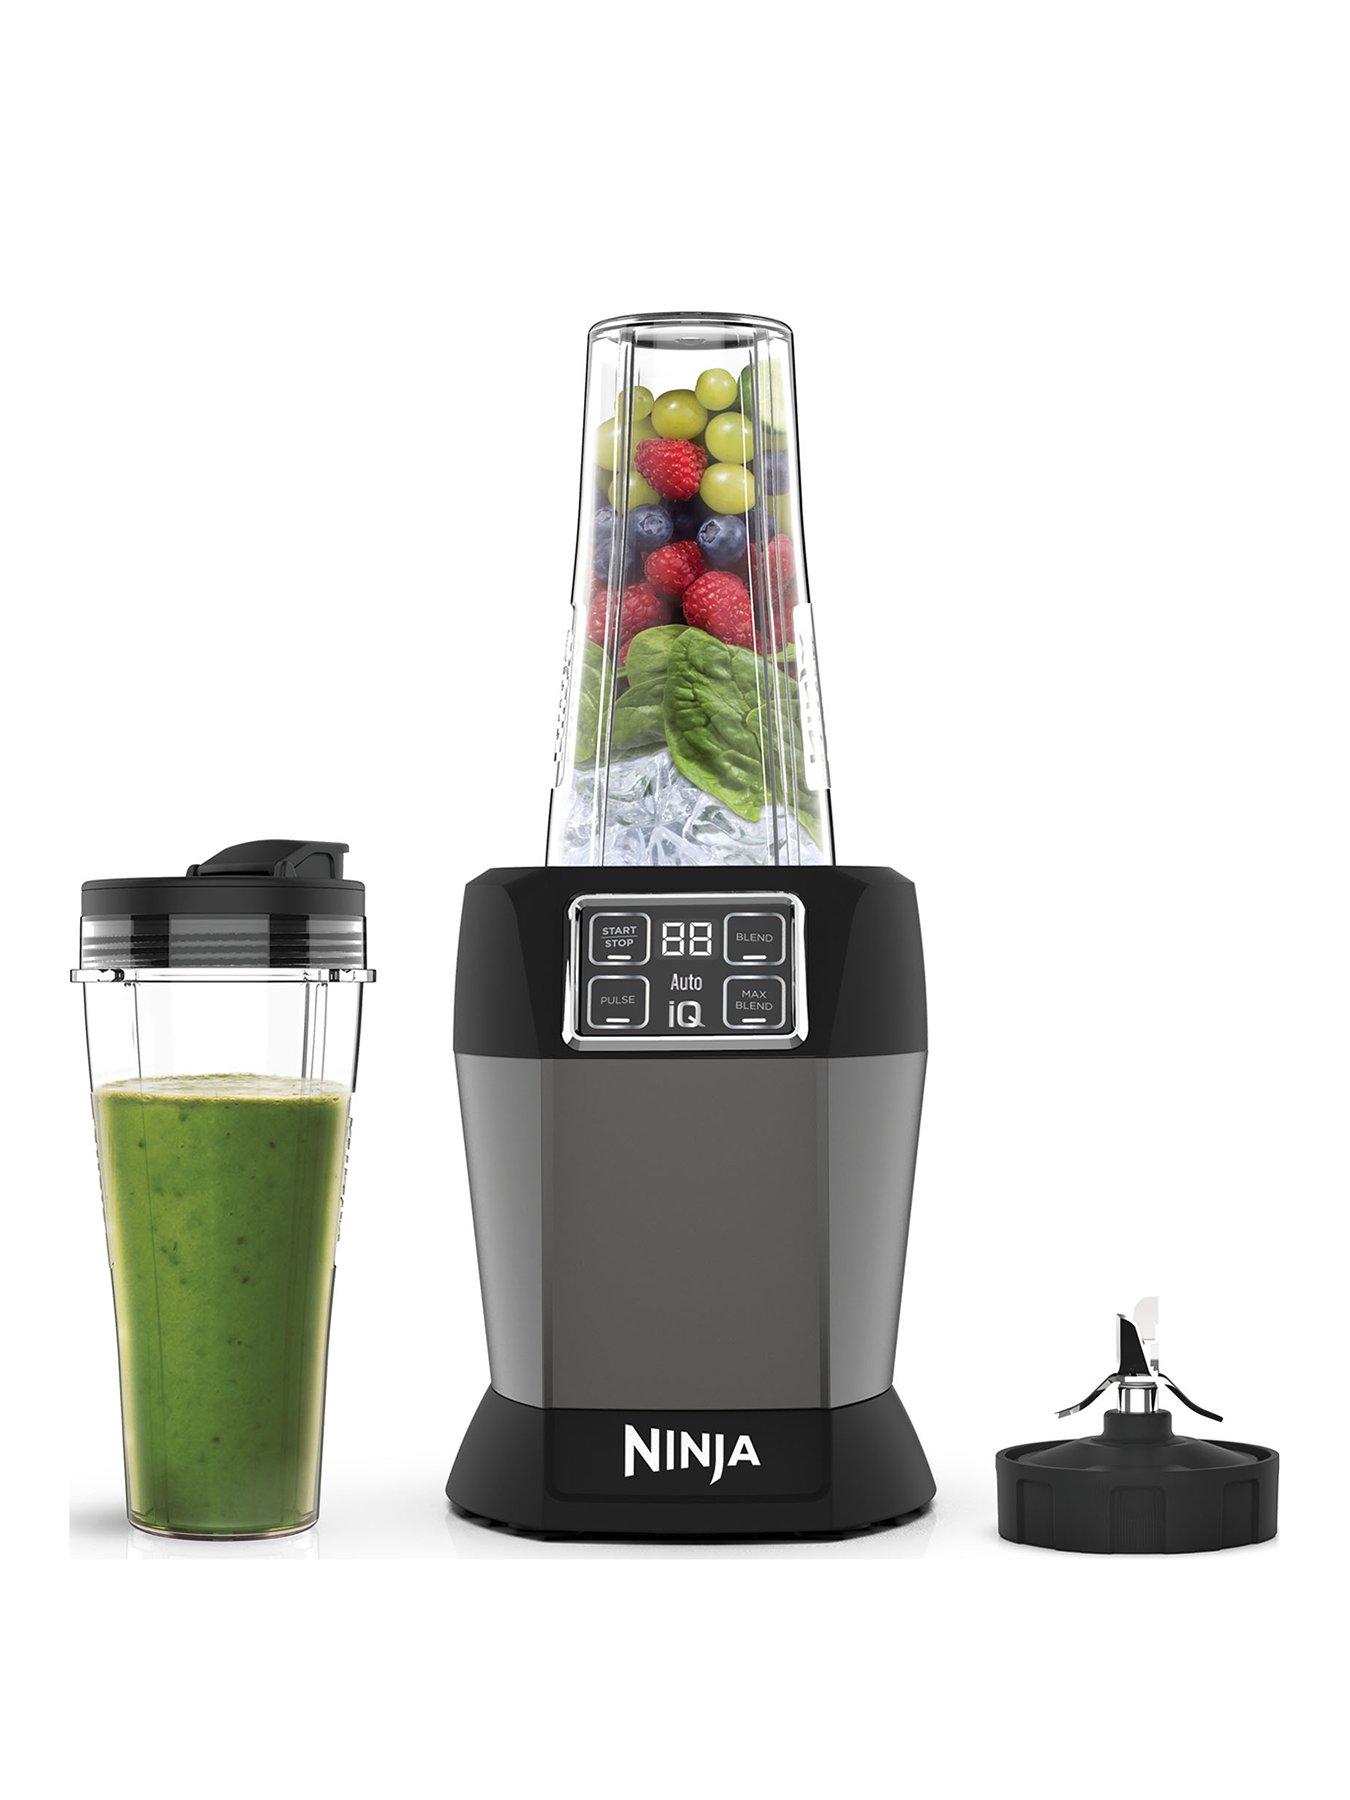 Ninja Blender DUO with Vacuum Blending and Micro-Juice Technology